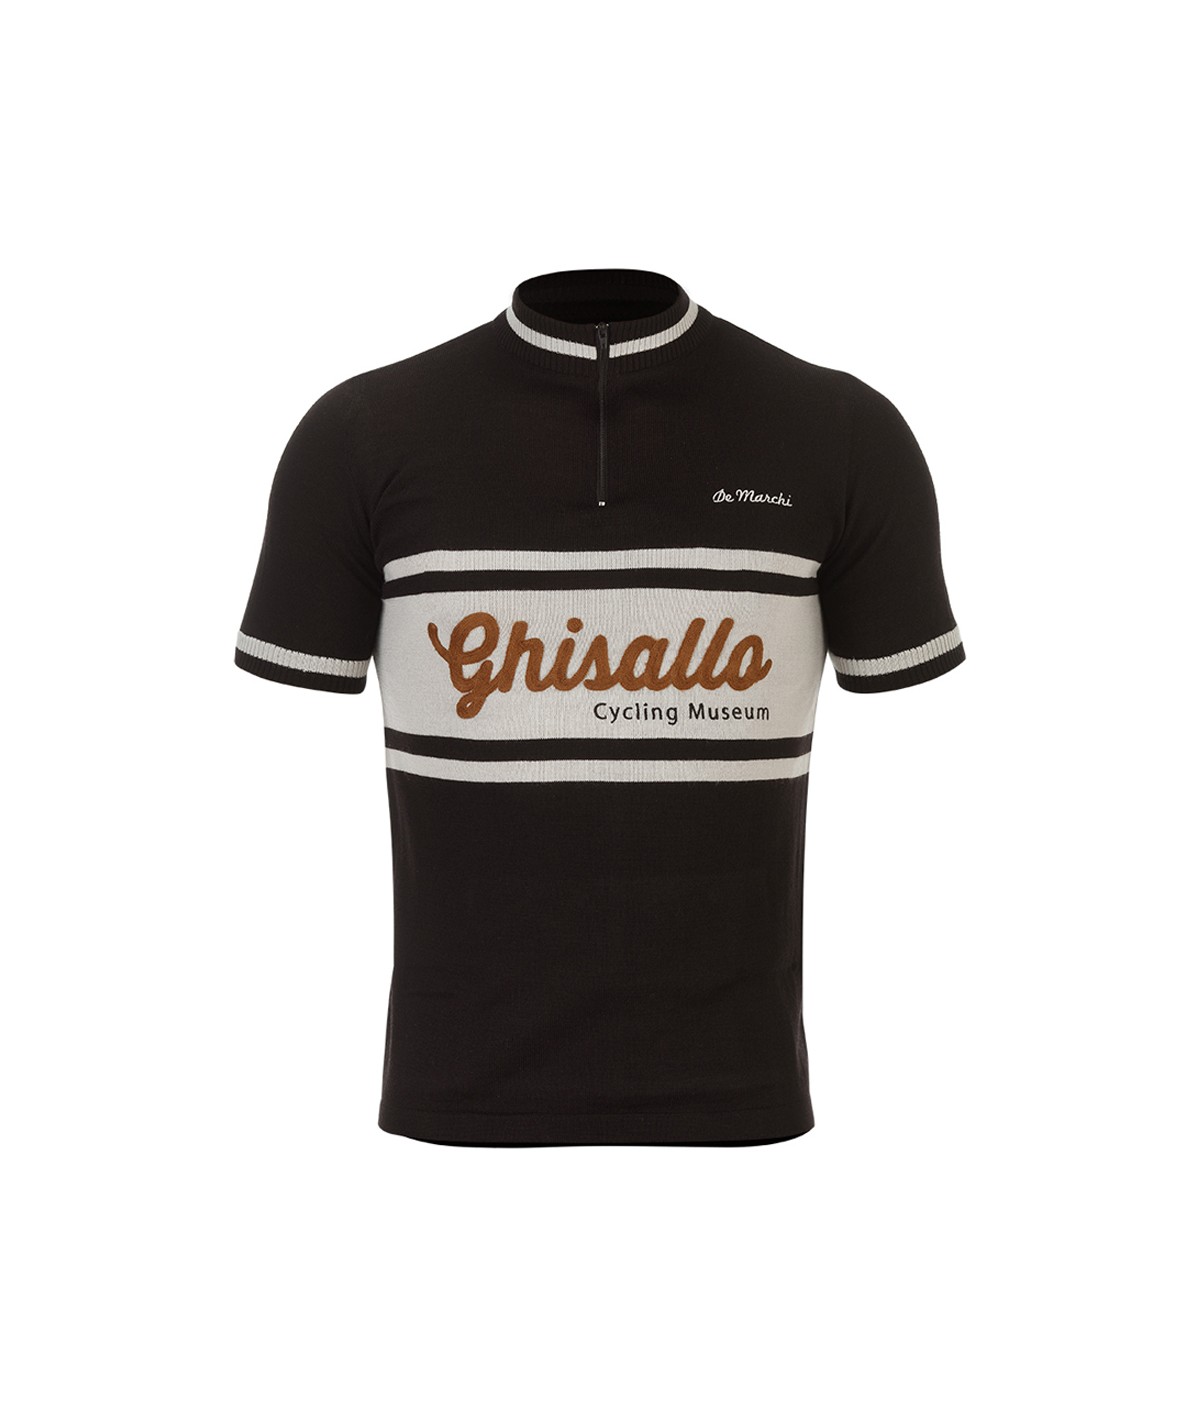 Replica vintage jersey from 1970, Ghisallo logo